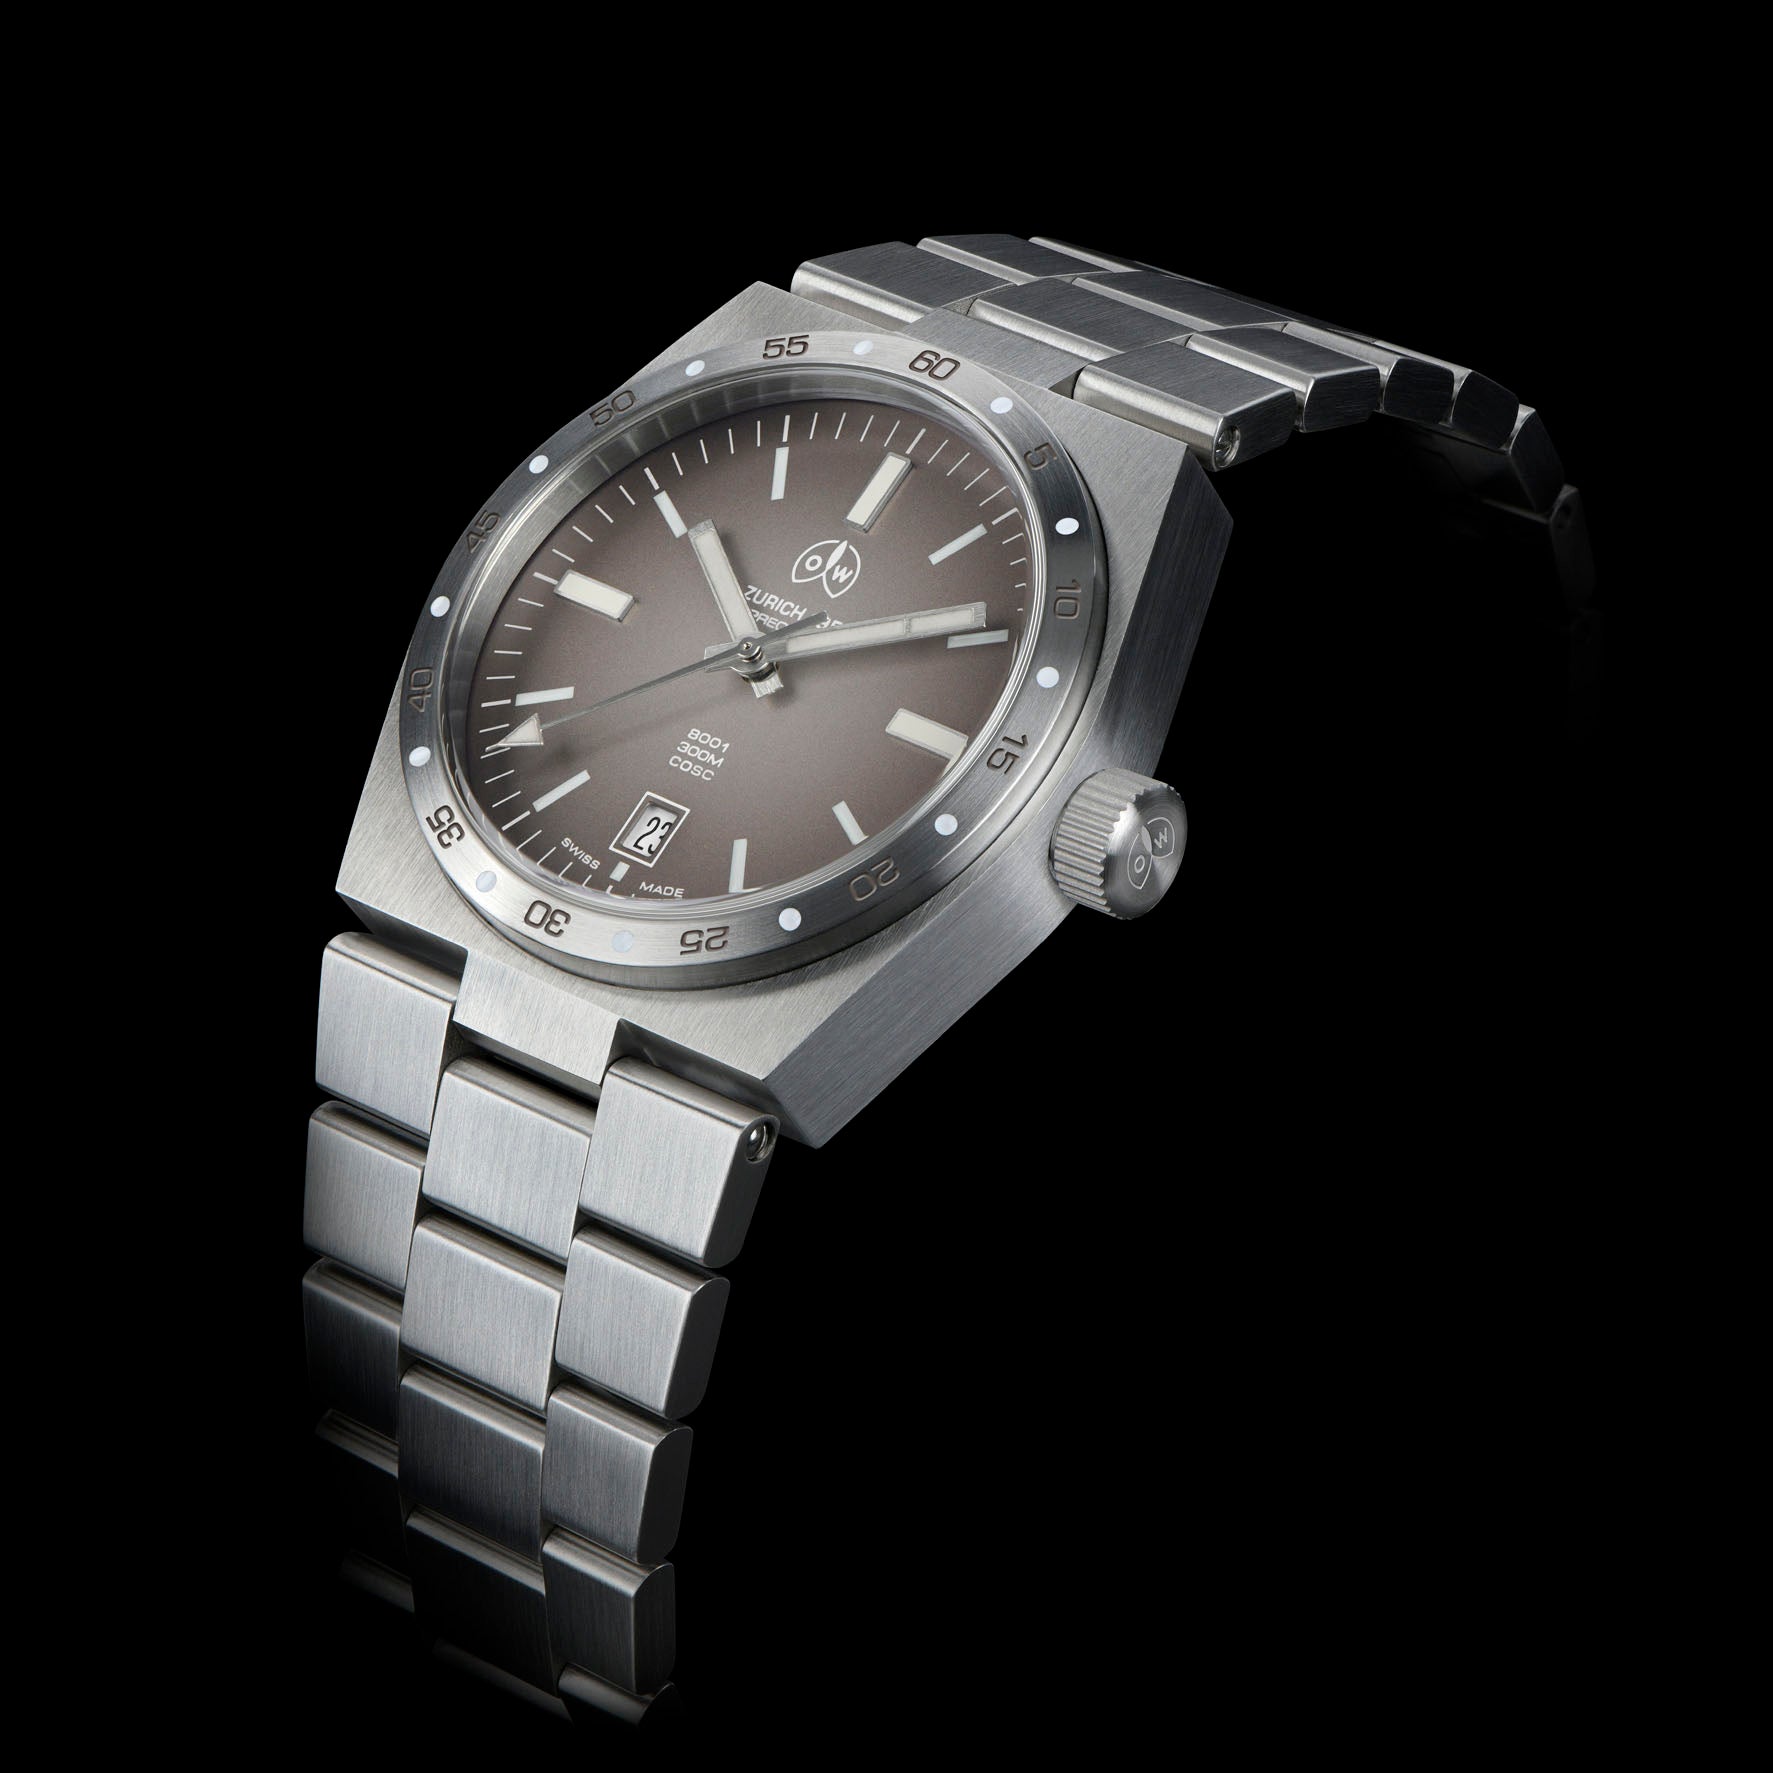 U-Boat Watch - Stainless Steel Watch With Black Dial